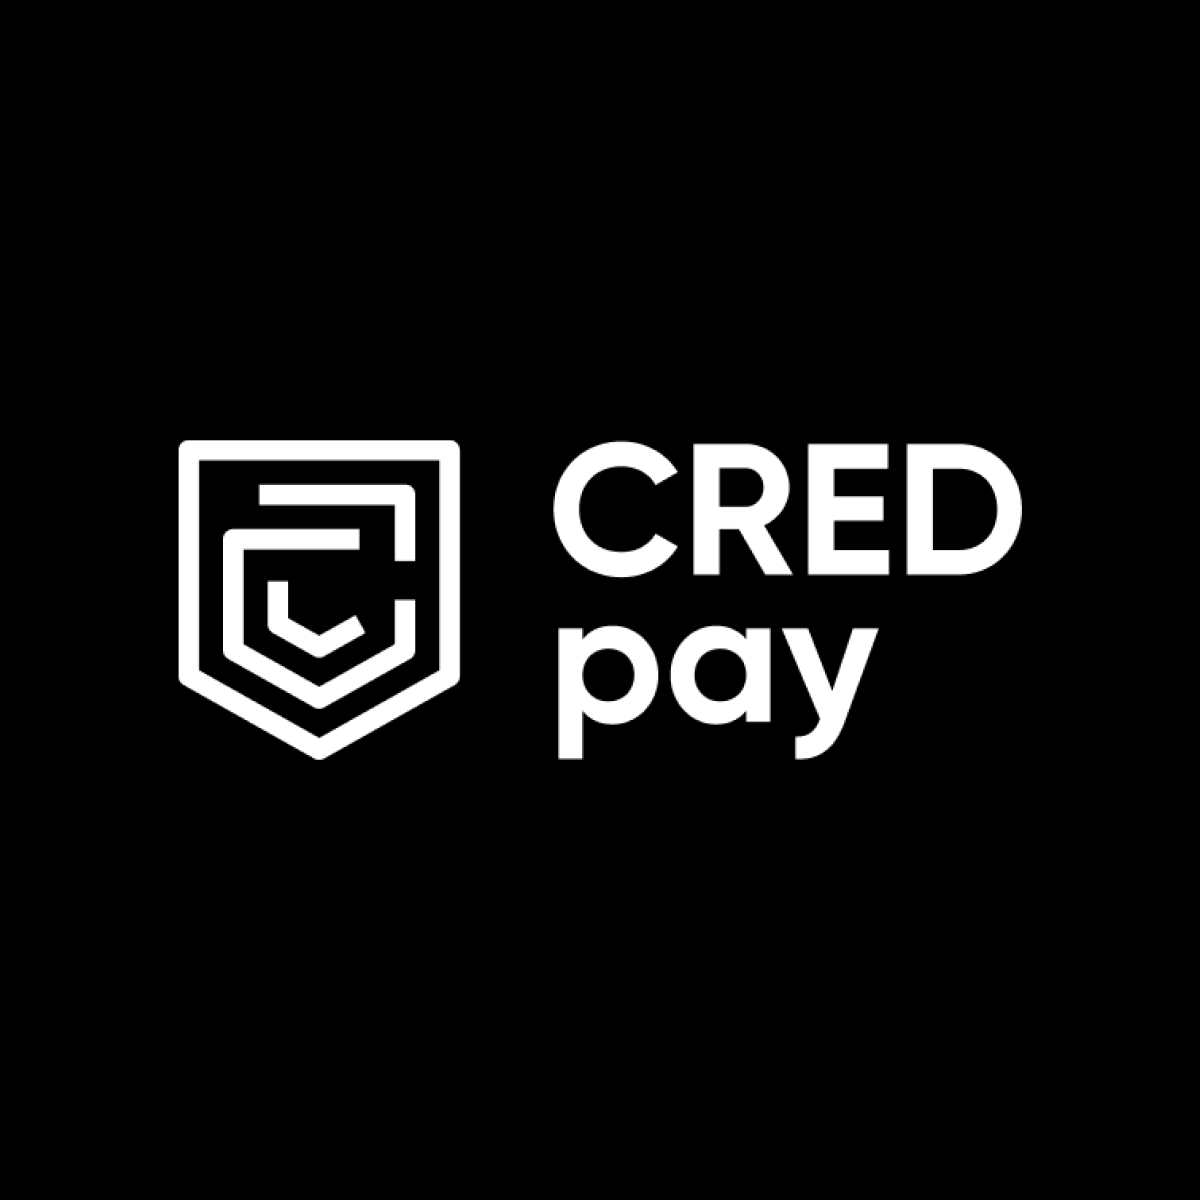 CRED pay